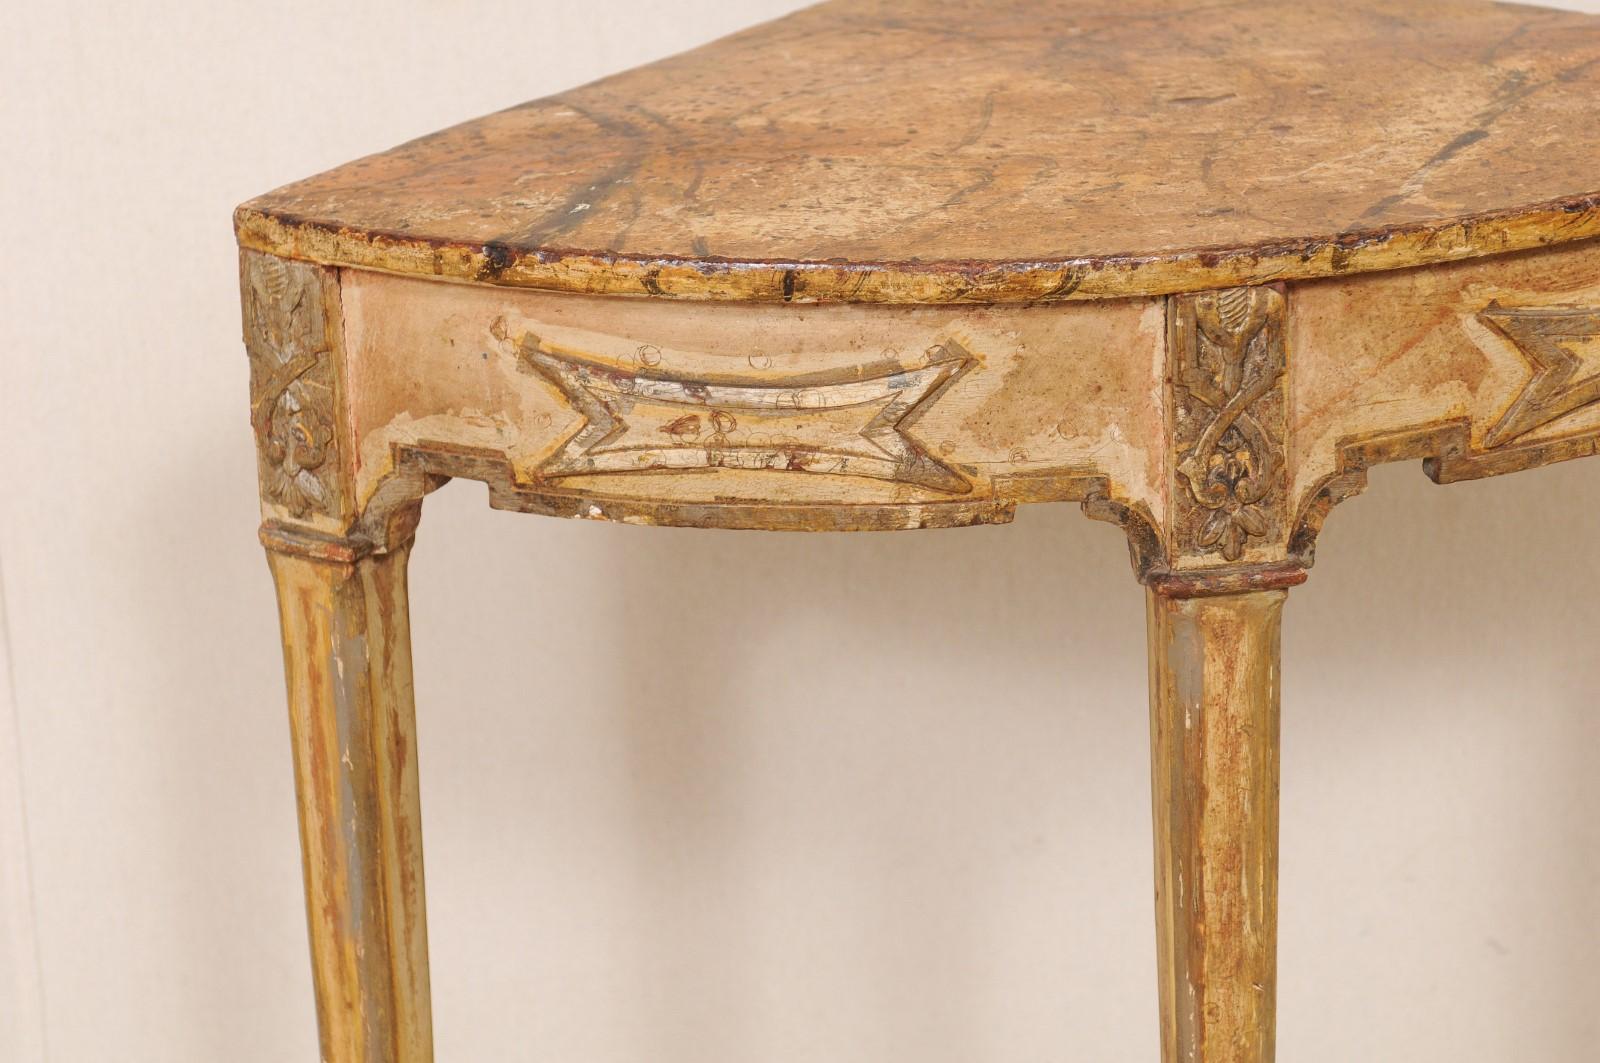 Italian Three-Legged Corner Table with Faux Marble Painted Top, Mid-20th Century For Sale 1